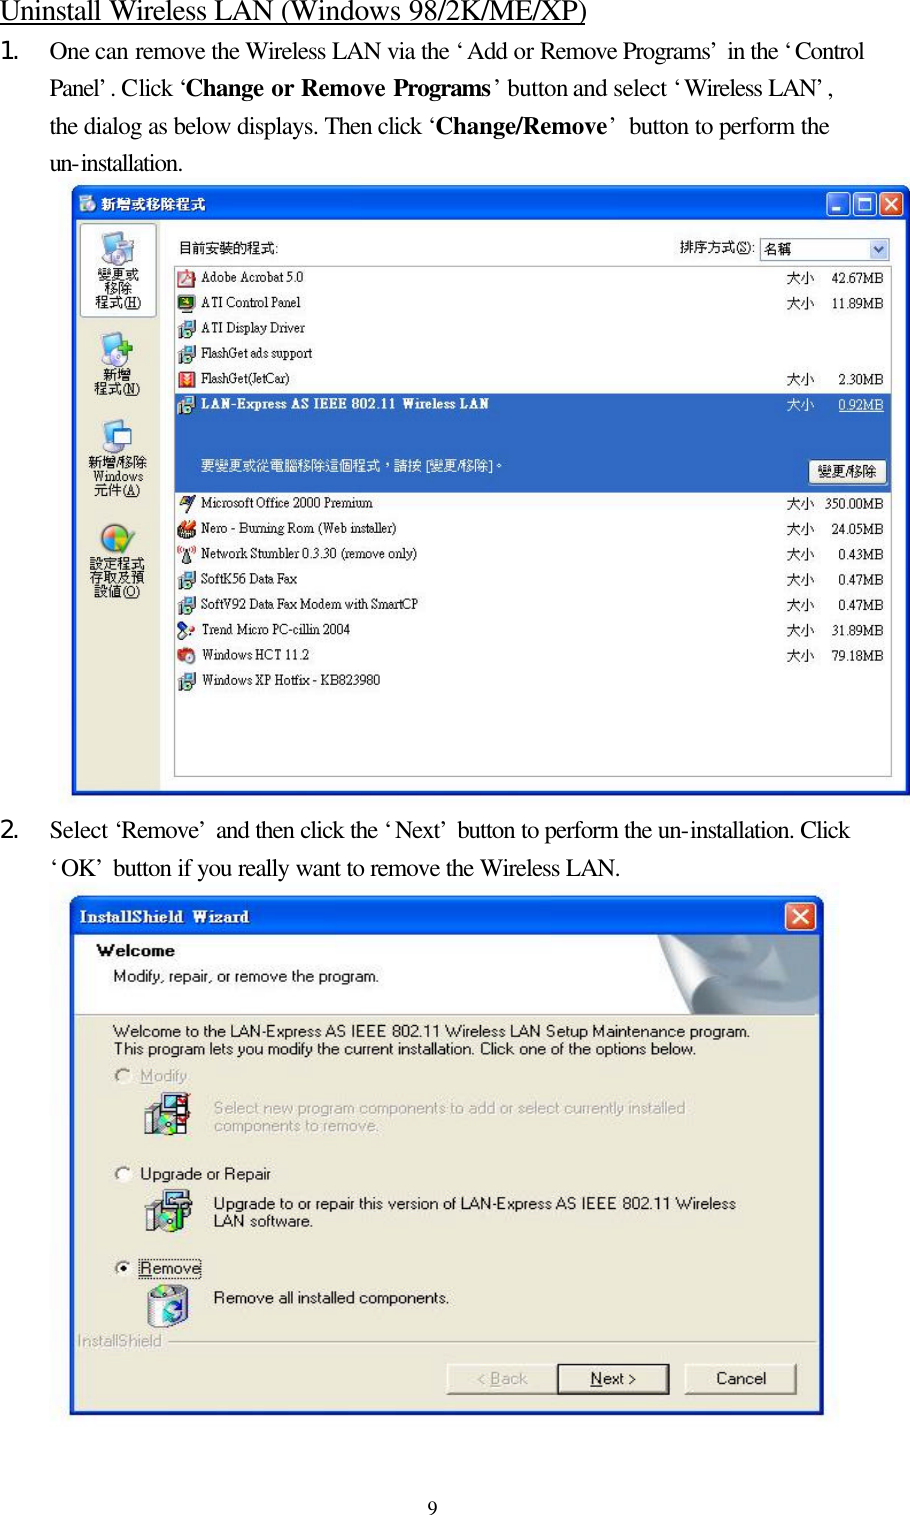  9Uninstall Wireless LAN (Windows 98/2K/ME/XP) 1.  One can remove the Wireless LAN via the ‘Add or Remove Programs’ in the ‘Control Panel’. Click ‘Change or Remove Programs’ button and select ‘Wireless LAN’, the dialog as below displays. Then click ‘Change/Remove’  button to perform the un-installation.  2.  Select ‘Remove’ and then click the ‘Next’ button to perform the un-installation. Click ‘OK’ button if you really want to remove the Wireless LAN.  